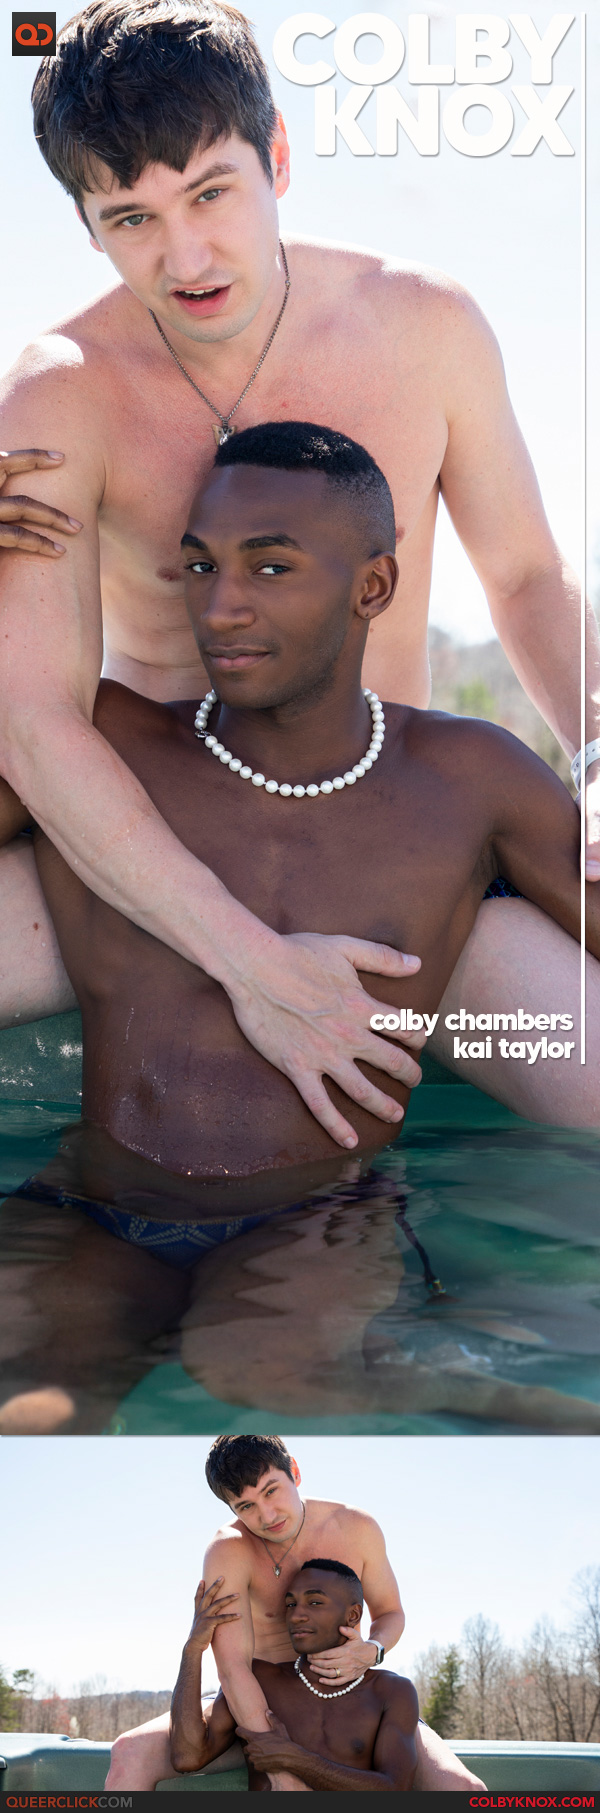 Colby Knox: Kai Taylor and Colby Chambers